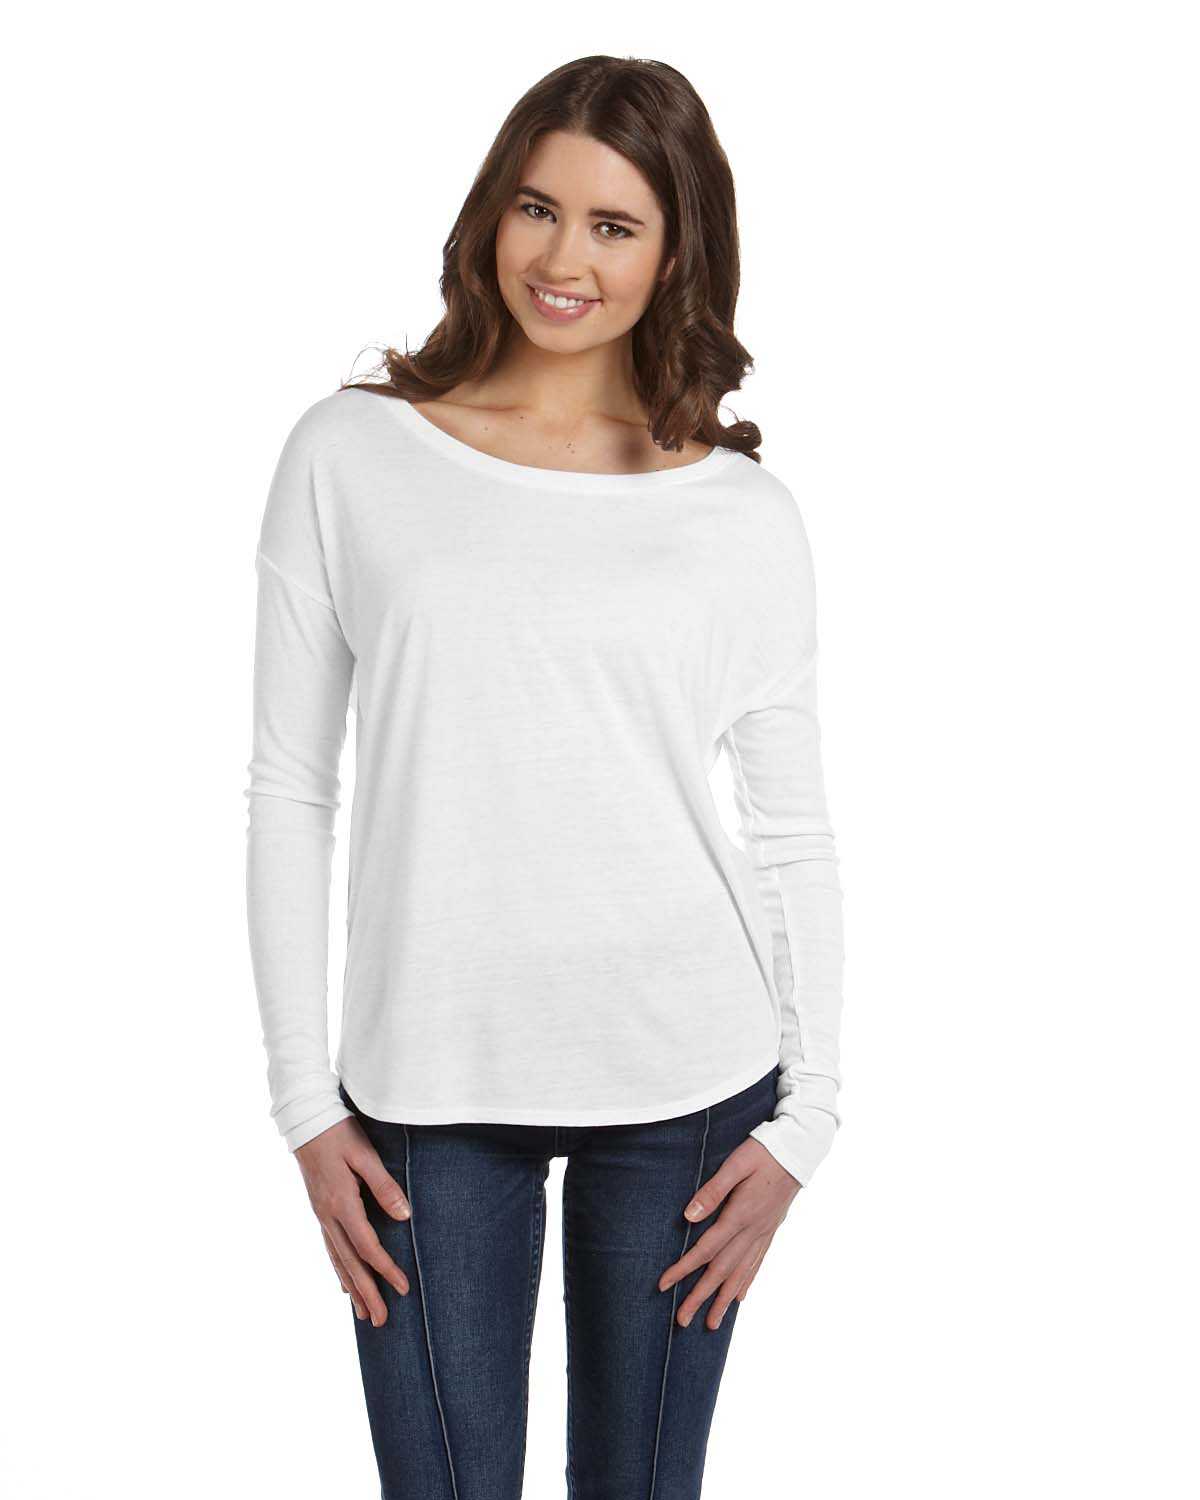 Bella + Canvas 8852 Ladies' Flowy Long-Sleeve T-Shirt with 2x1 Sleeves ...